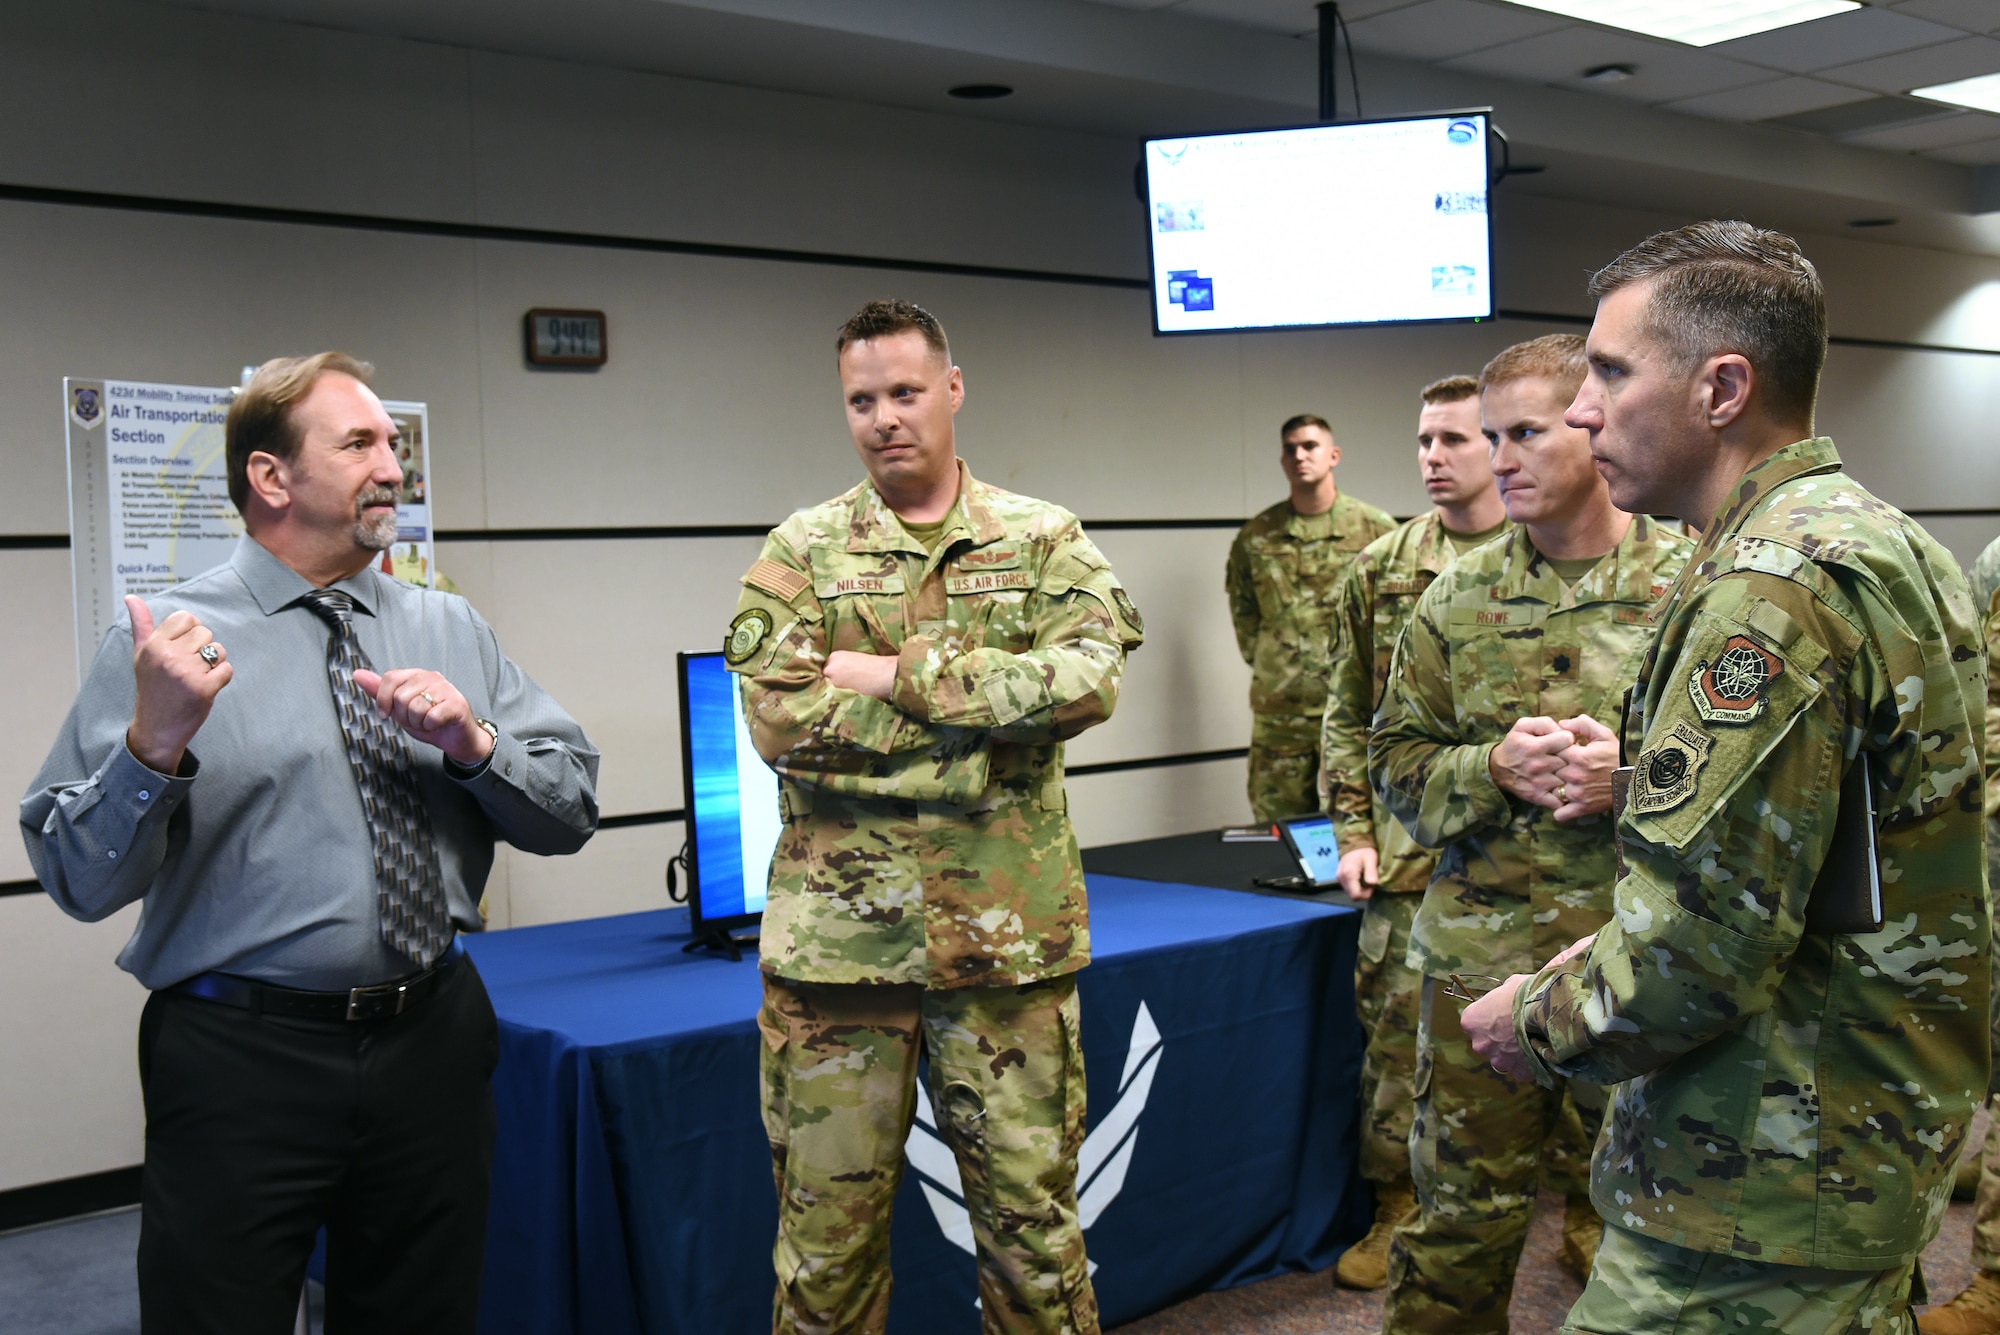 U.S. Air Force Expeditionary Center vice commander receives firsthand glimpse into U.S. Air Force Expeditionary Operations School training